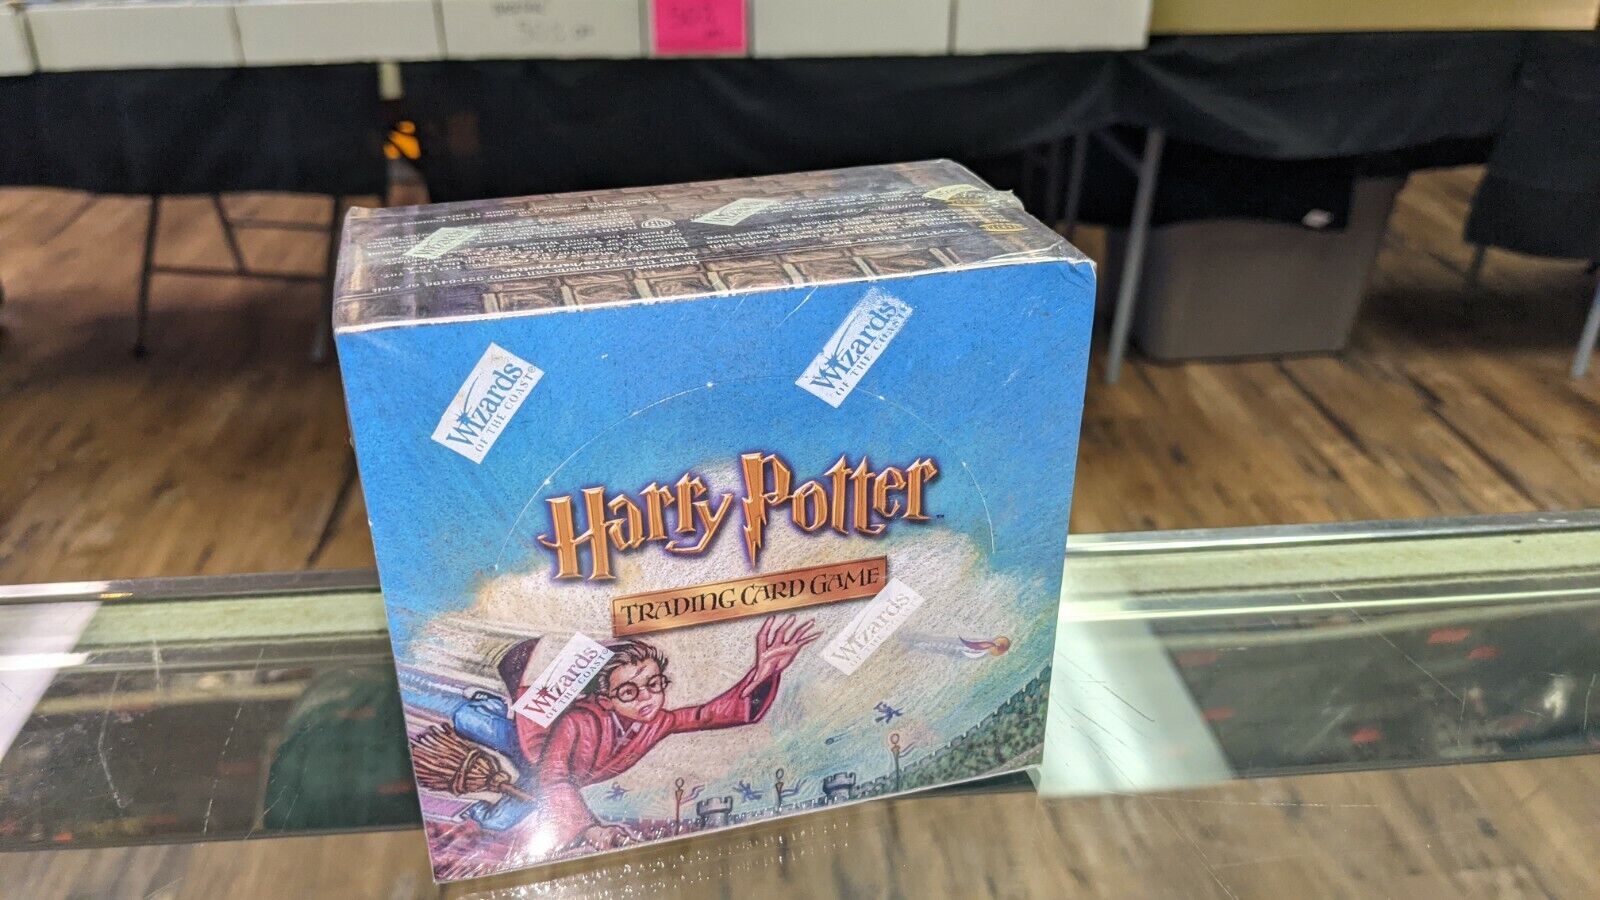 Harry Potter Quidditch Cup Wizards of the Coast Factory Sealed Wax Box 36 Packs